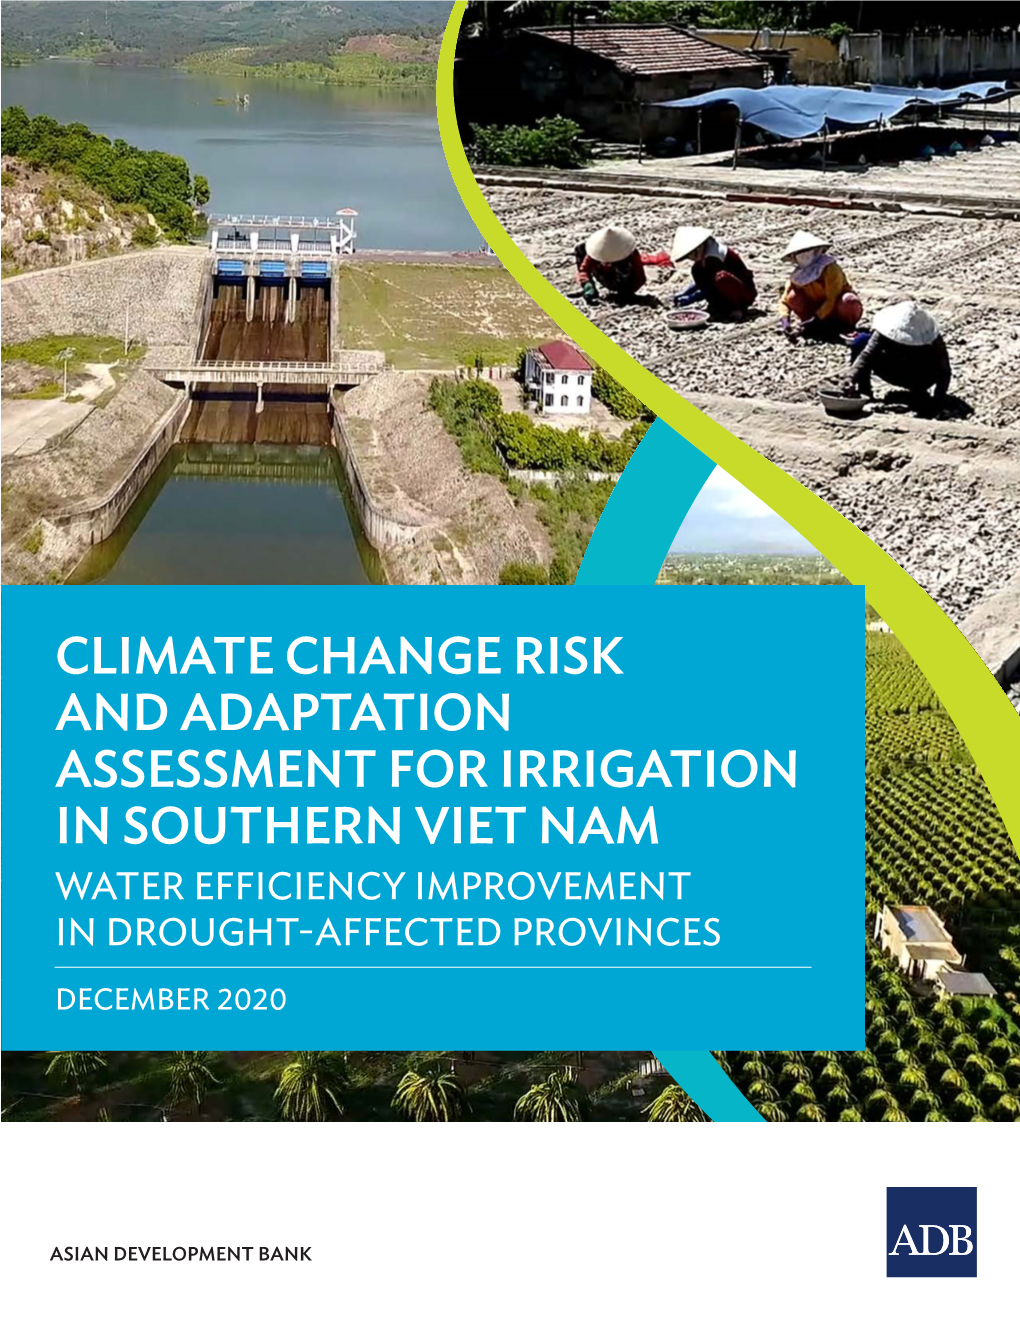 Climate Change Risk and Adaptation Assessment for Irrigation in Southern Viet Nam Water Efficiency Improvement in Drought-Affected Provinces